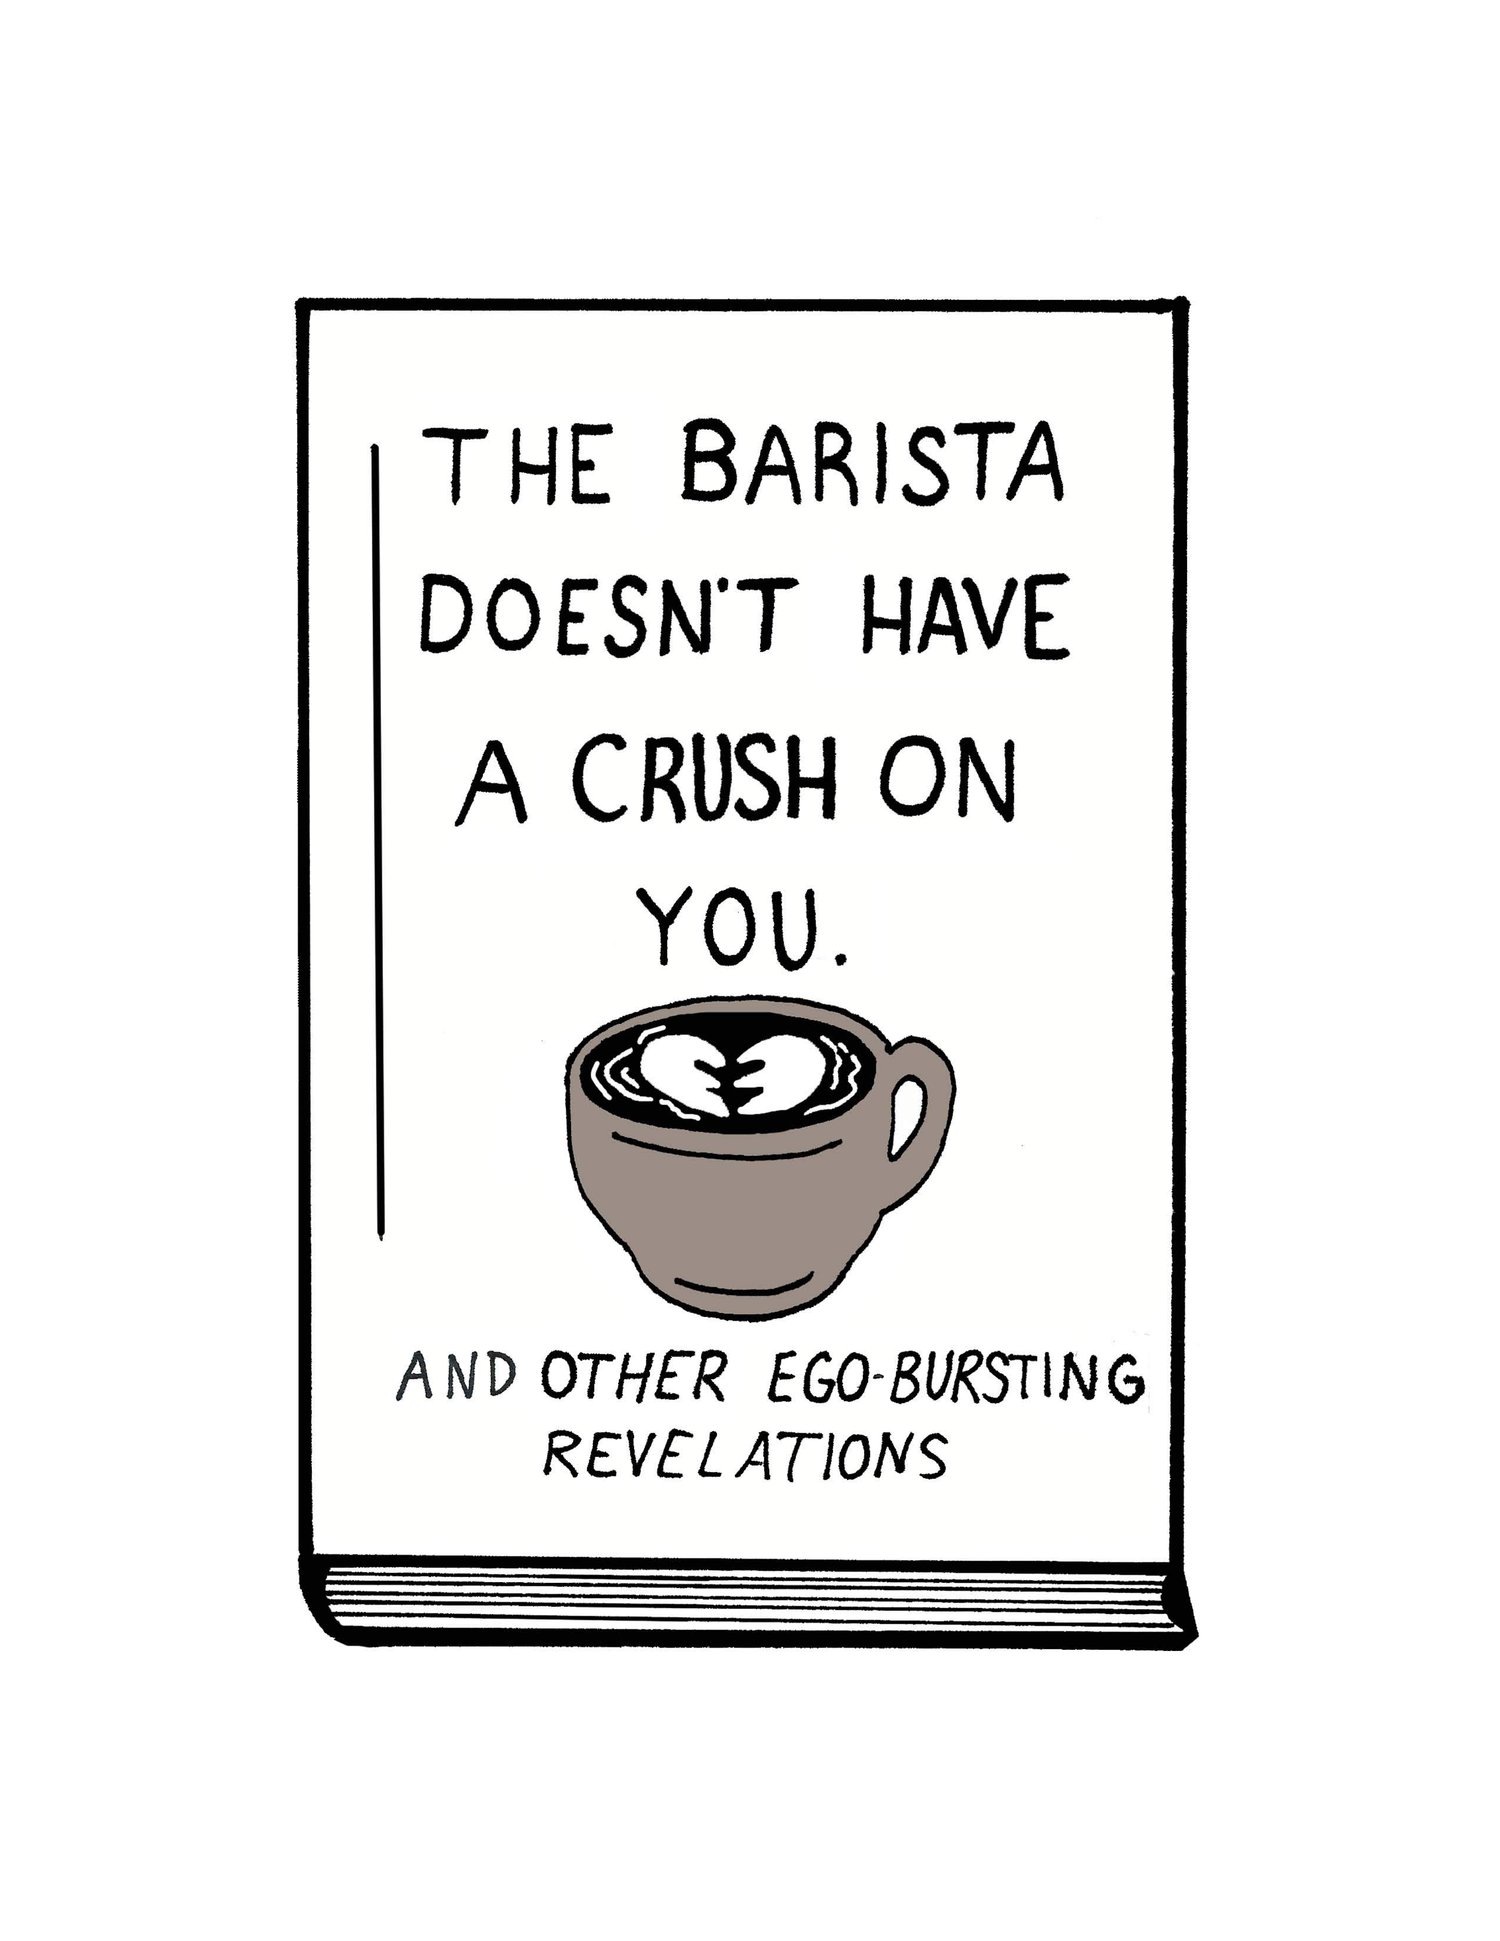 Image of The Barista Doesn't have a Crush on You - Print